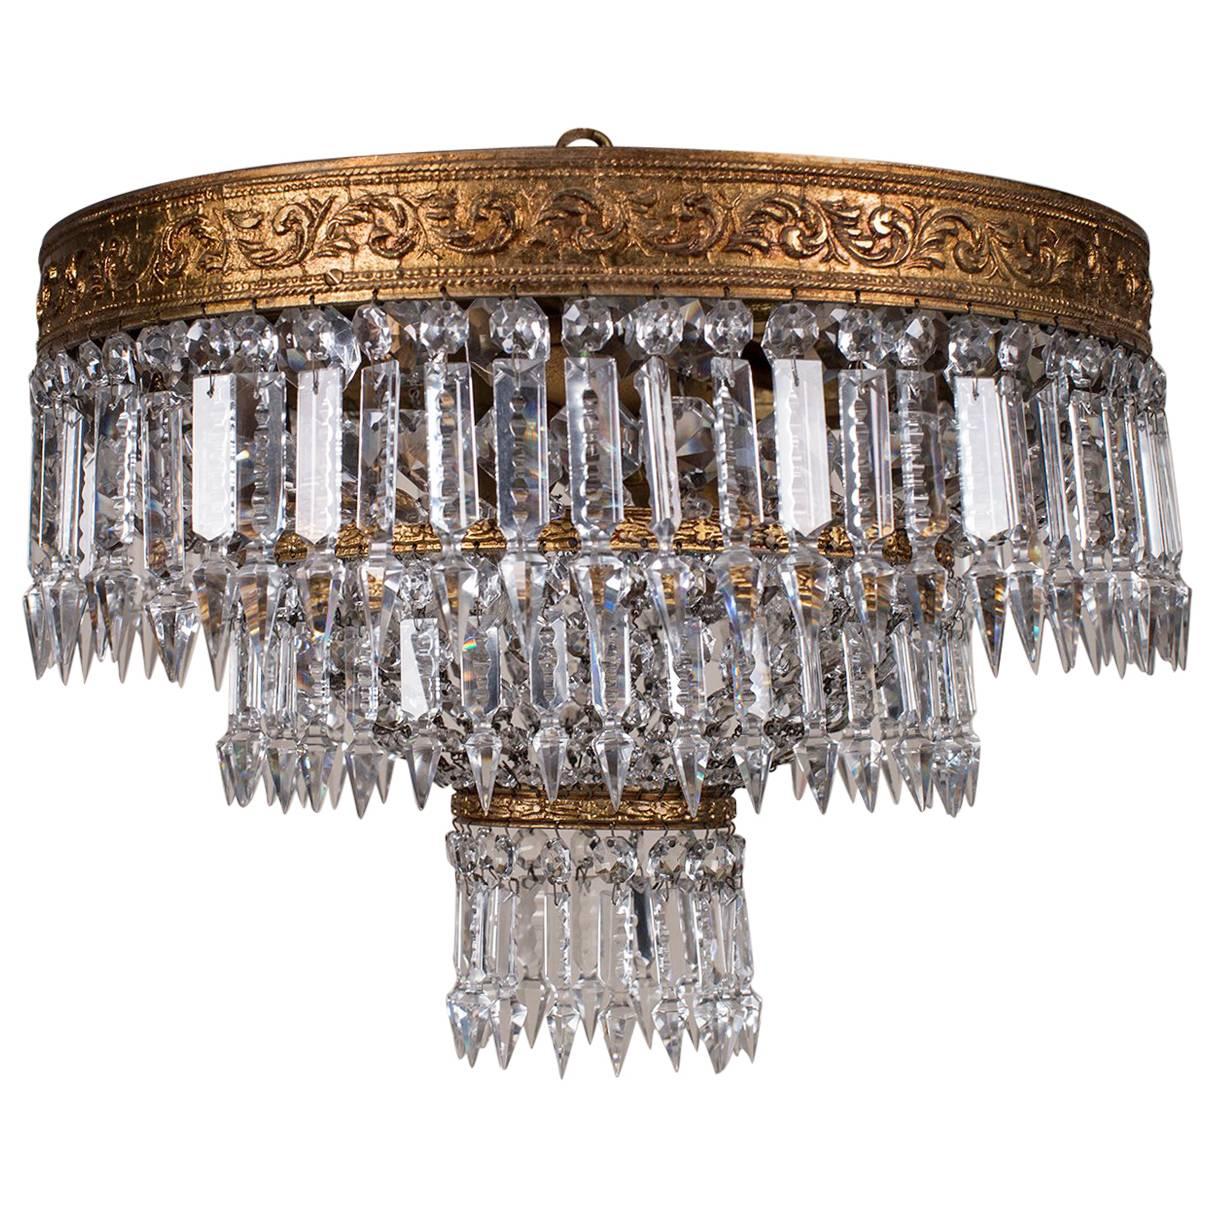 Antique French Empire Style Crystal Chandelier, circa 1900